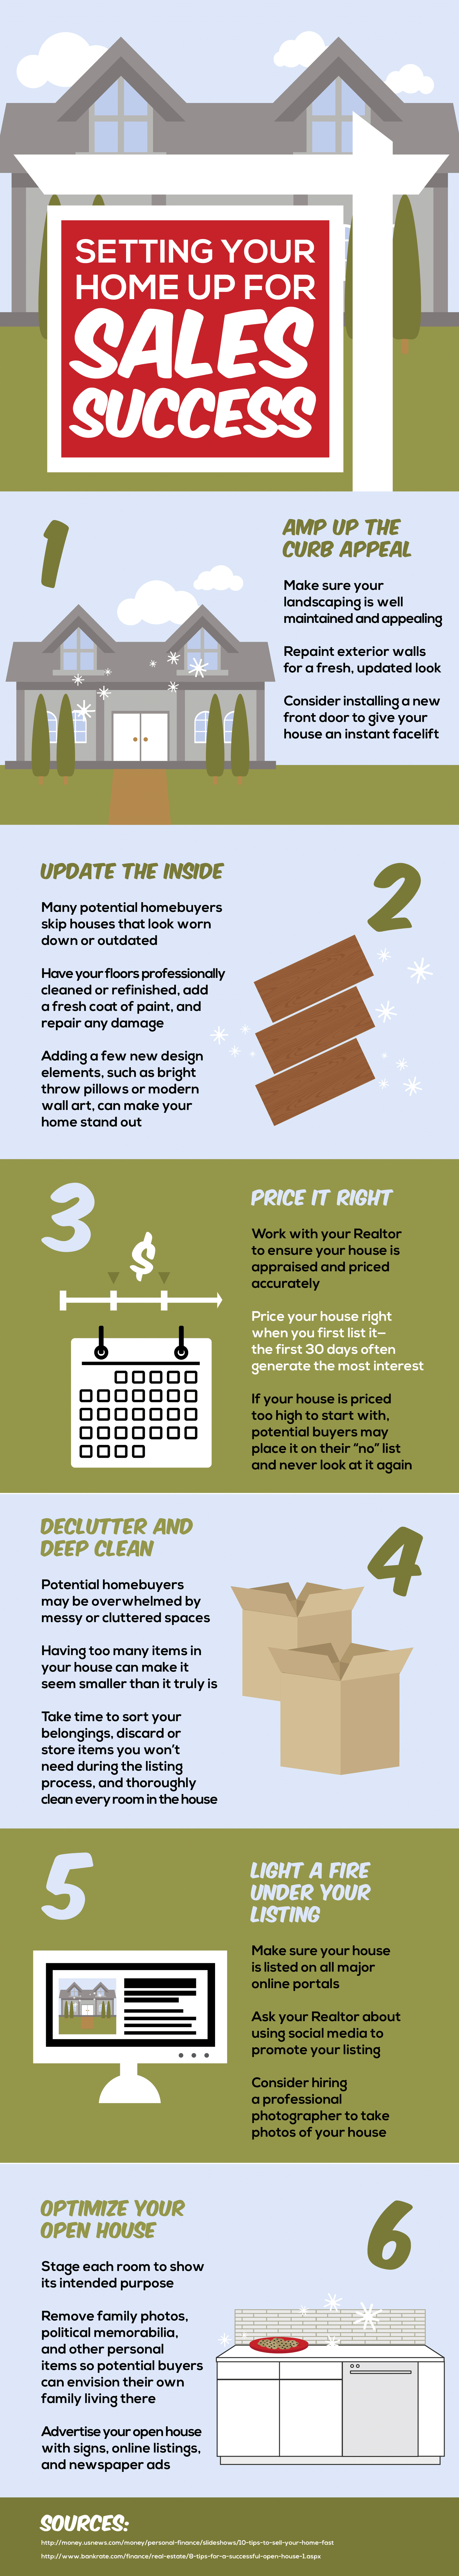 Infographic with tips for selling your home.